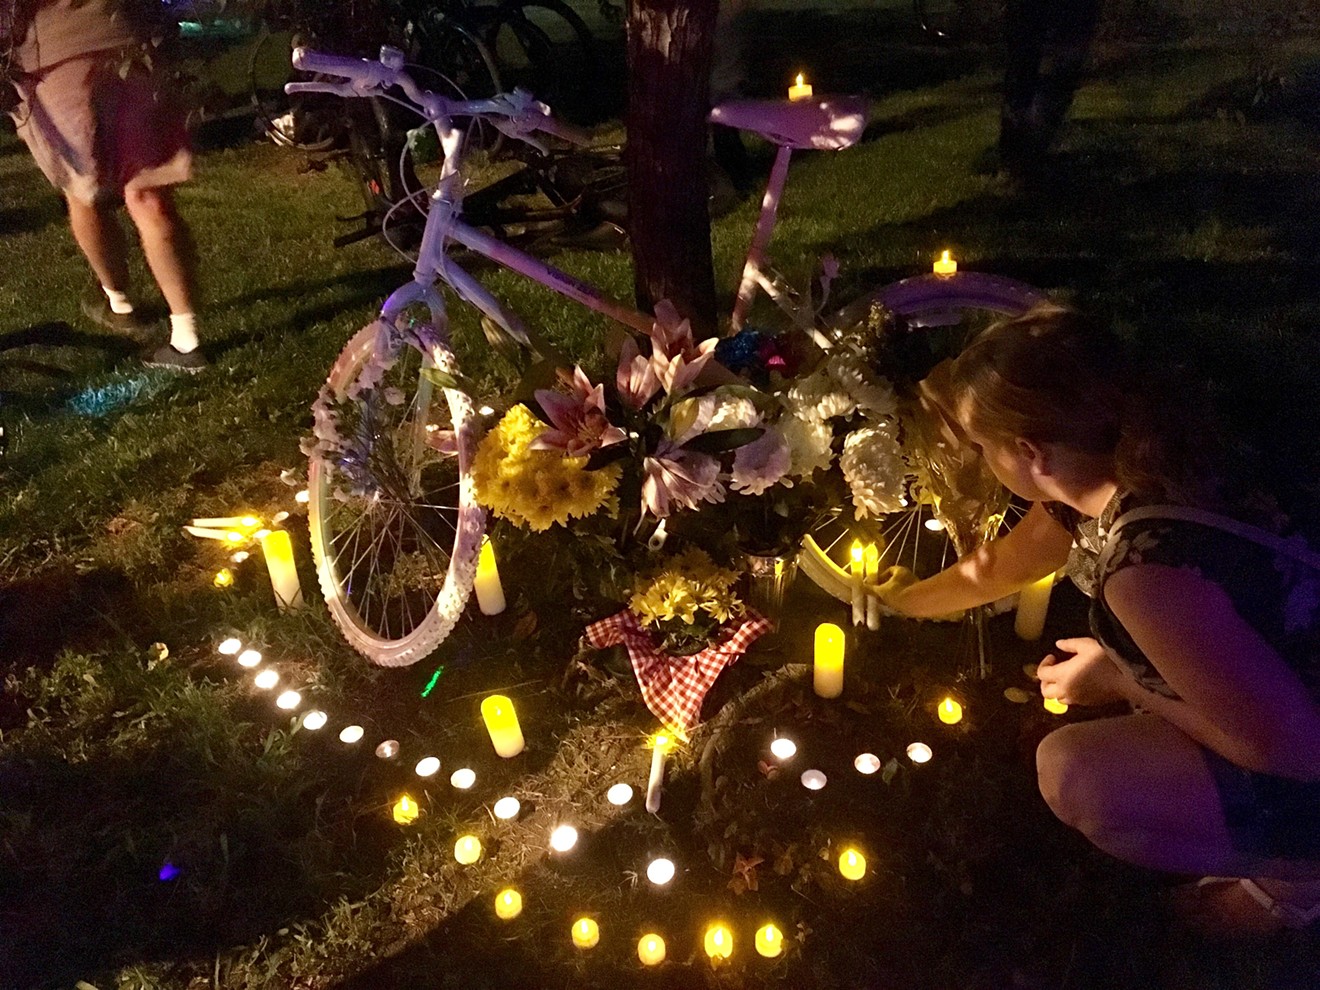 The white "ghost bike" honored the memory of Alexis Bounds.